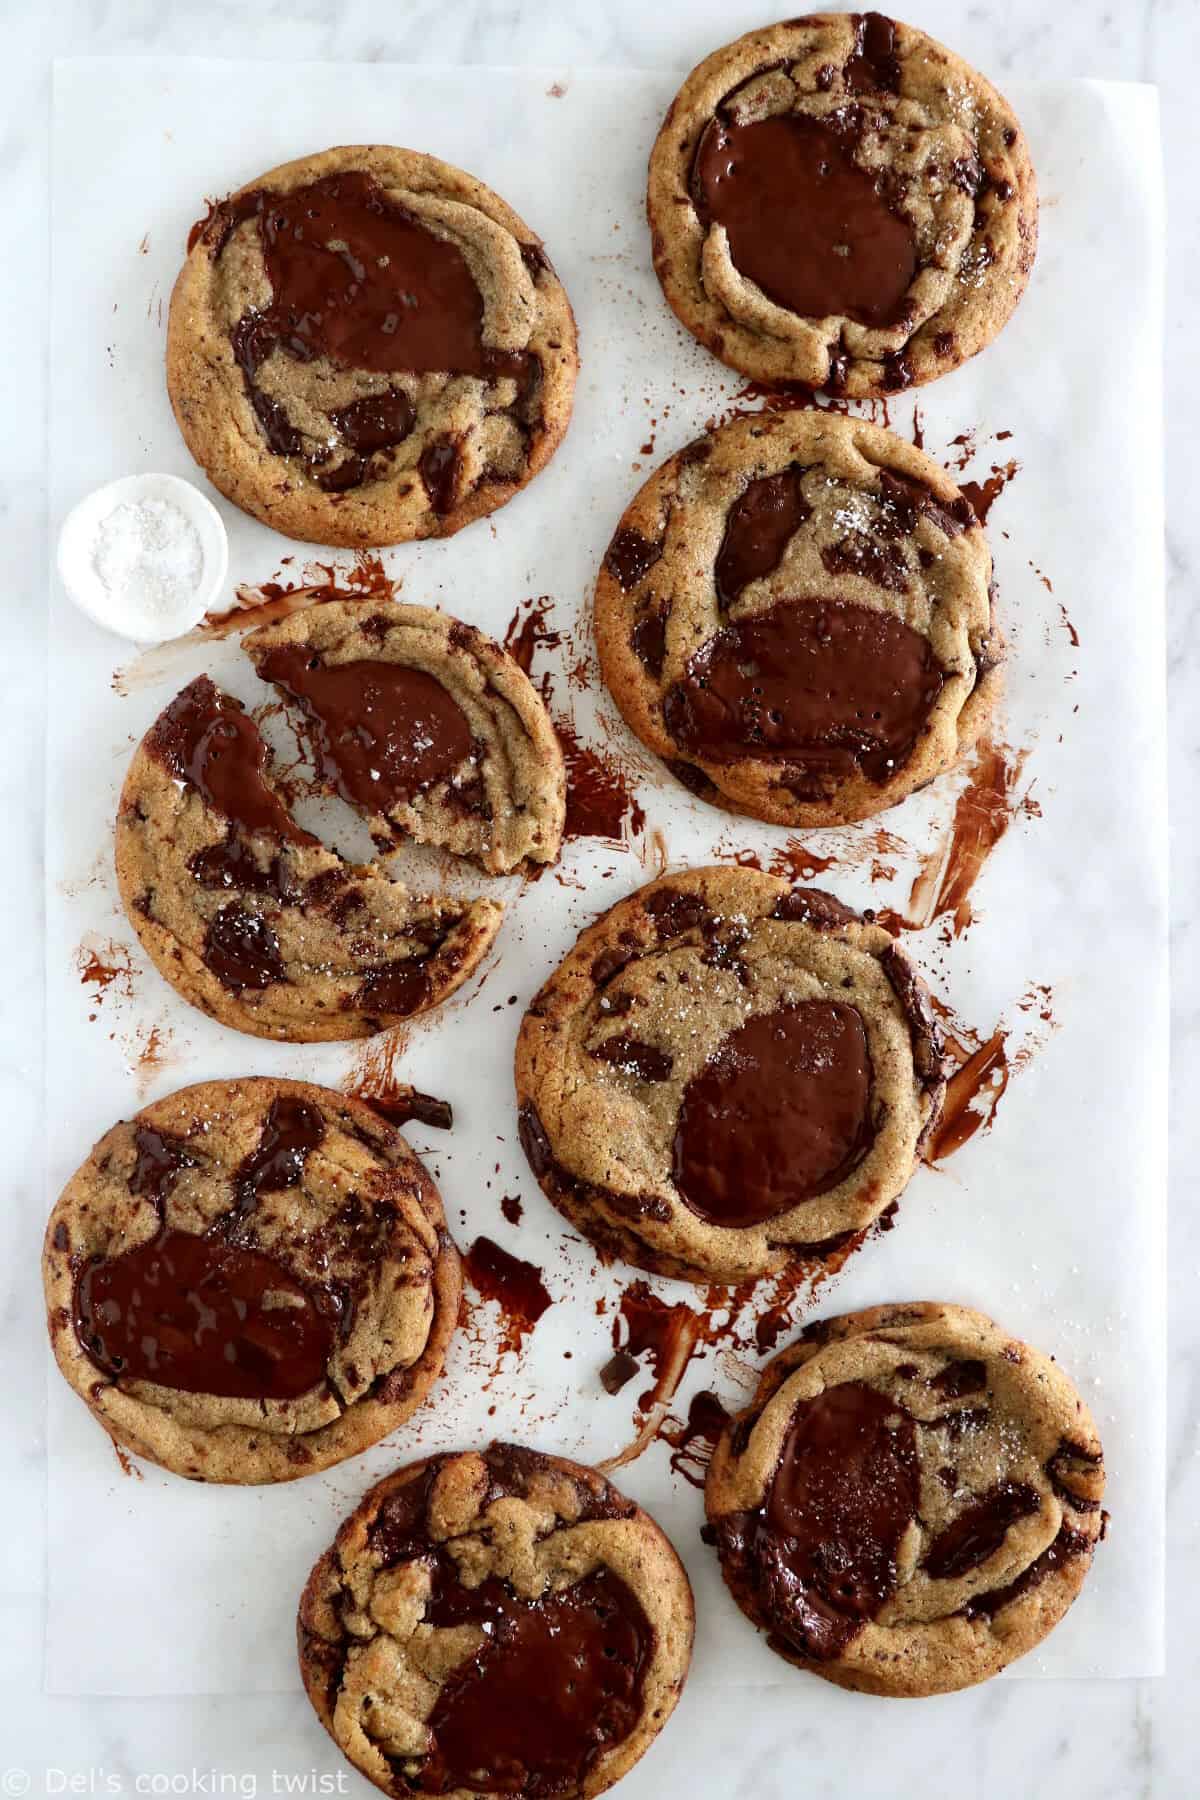 Espresso brown butter chocolate chunk cookies are buttery, chewy and slightly crispy, oozing with chocolate and intense espresso flavors.